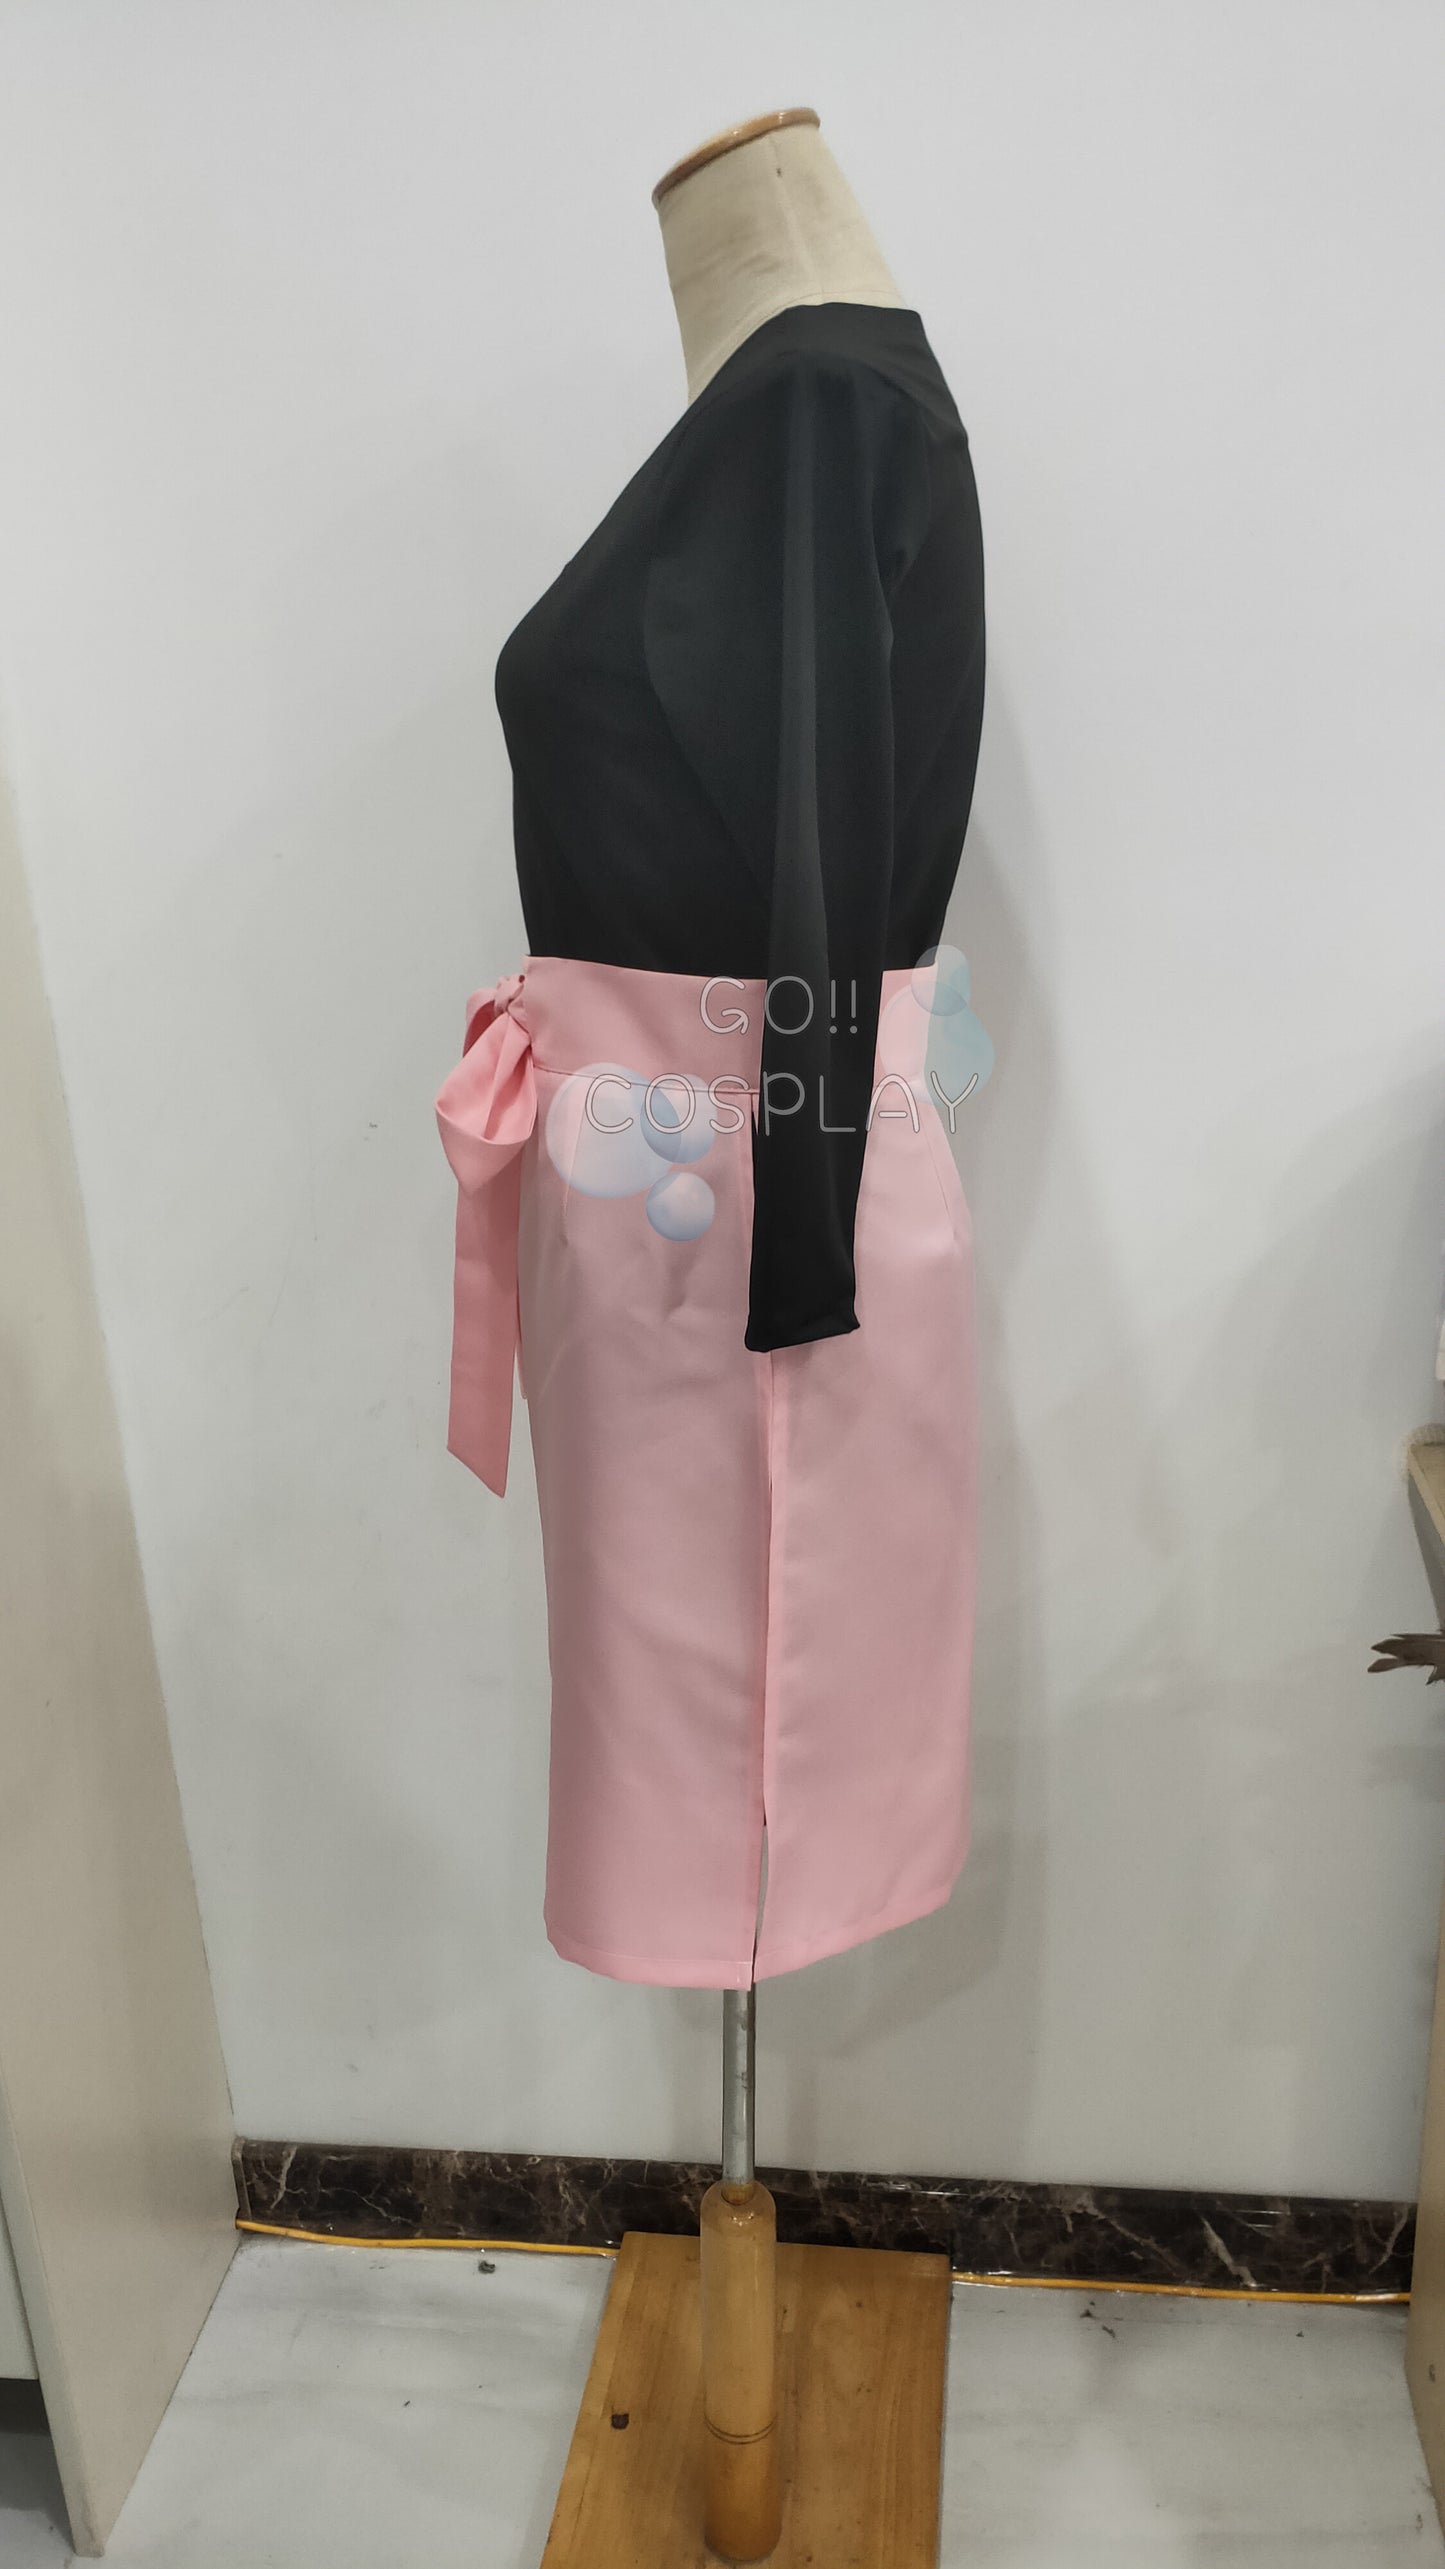 Rin Nohara Costume for Sale